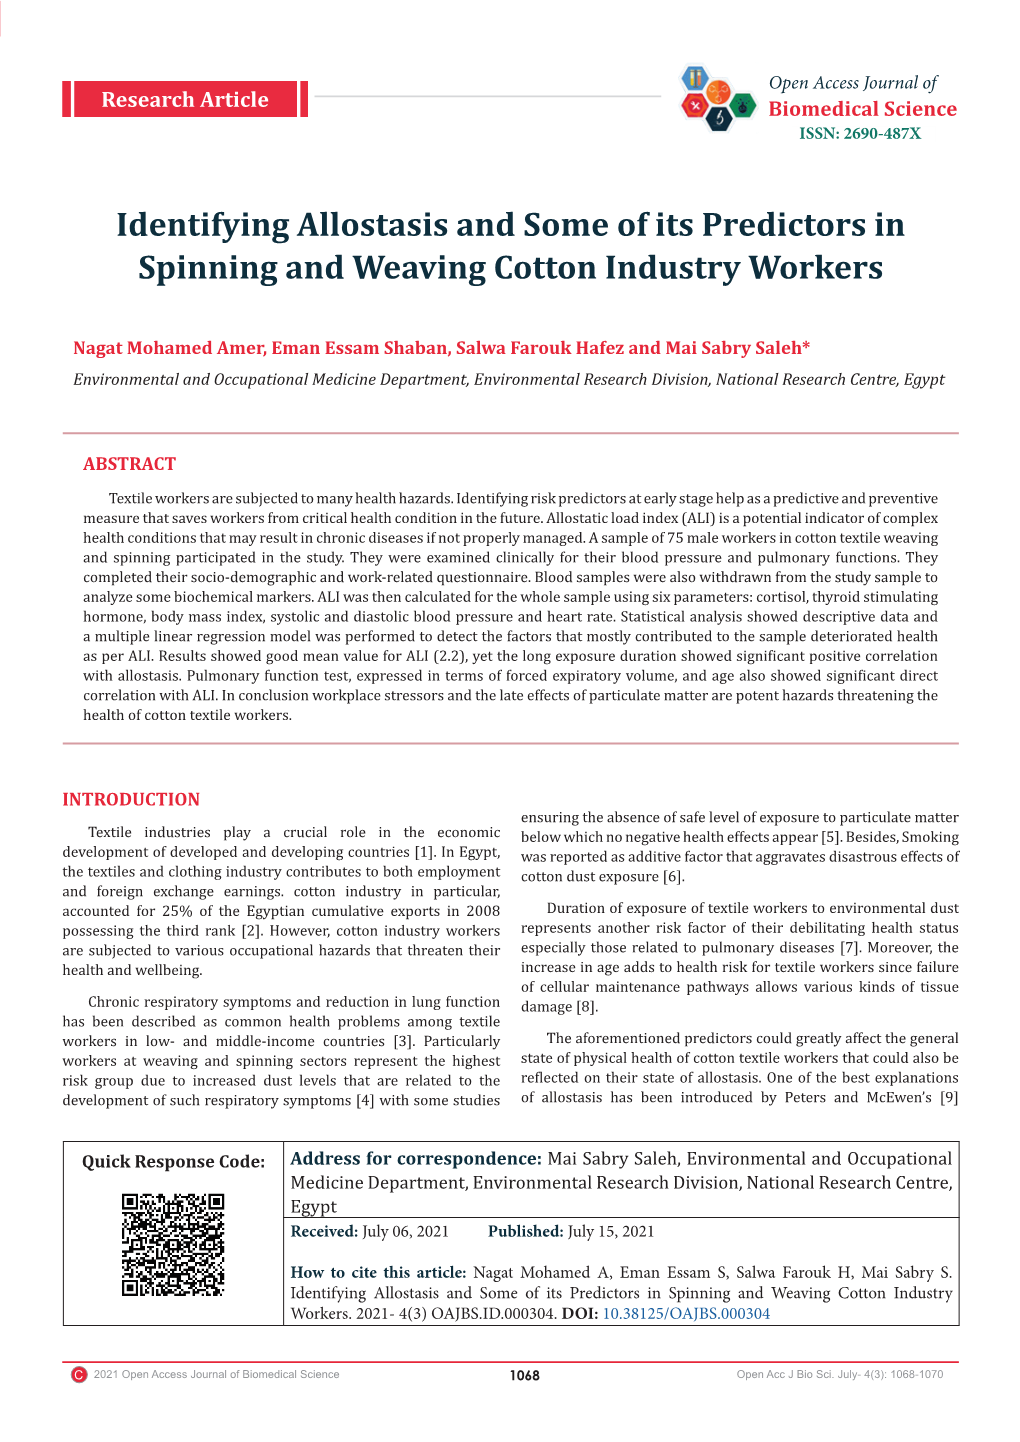 Identifying Allostasis and Some of Its Predictors in Spinning and Weaving Cotton Industry Workers